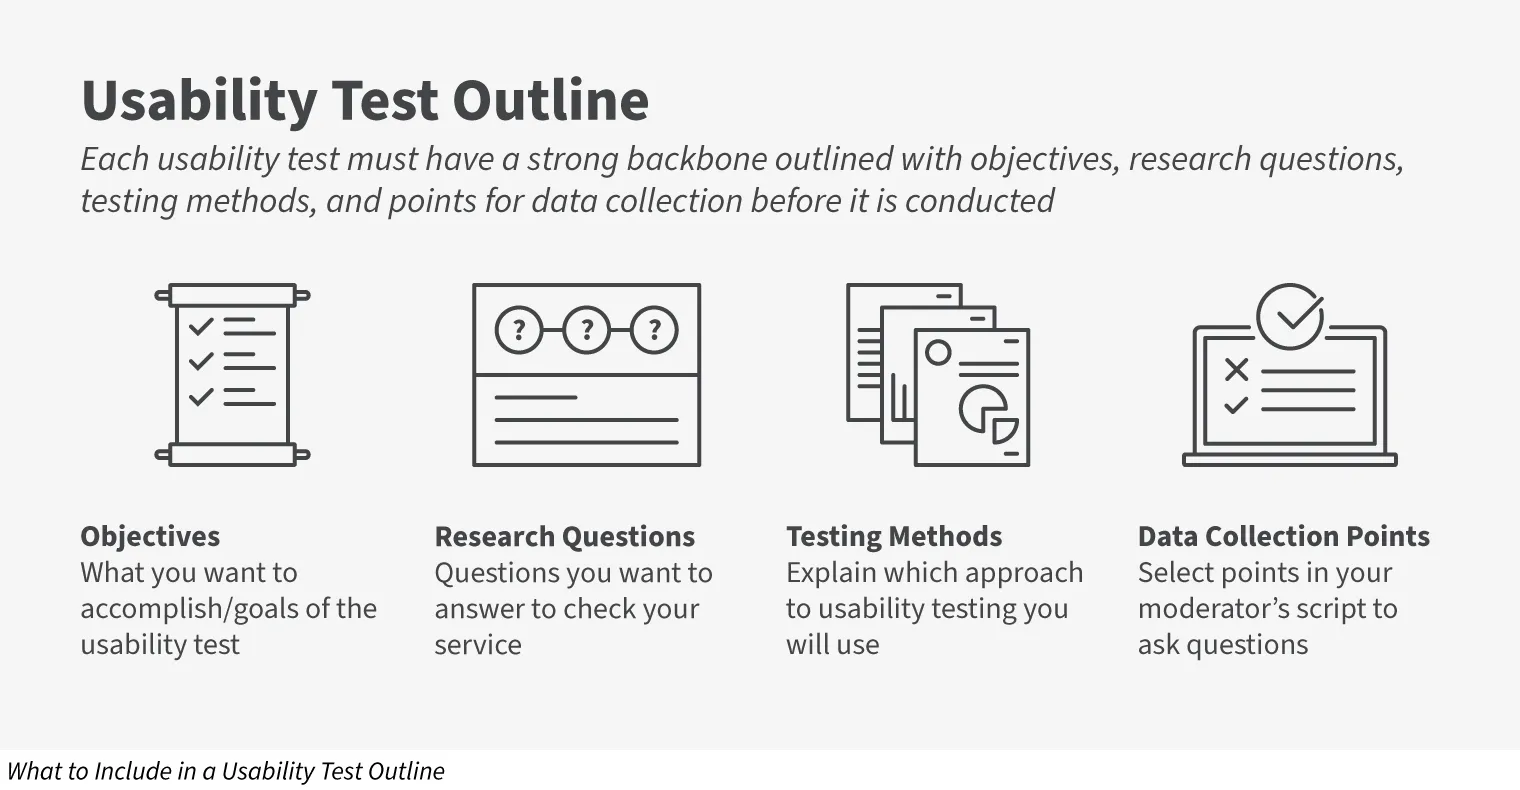 Usability Test Outline graphic. Each test must have a strong backbone outlined with objectives (what you want to accomplish), research questions (what you want to answer), testing methods (what approach will you use), and points for data collection (when will you ask questions) before it’s conducted.